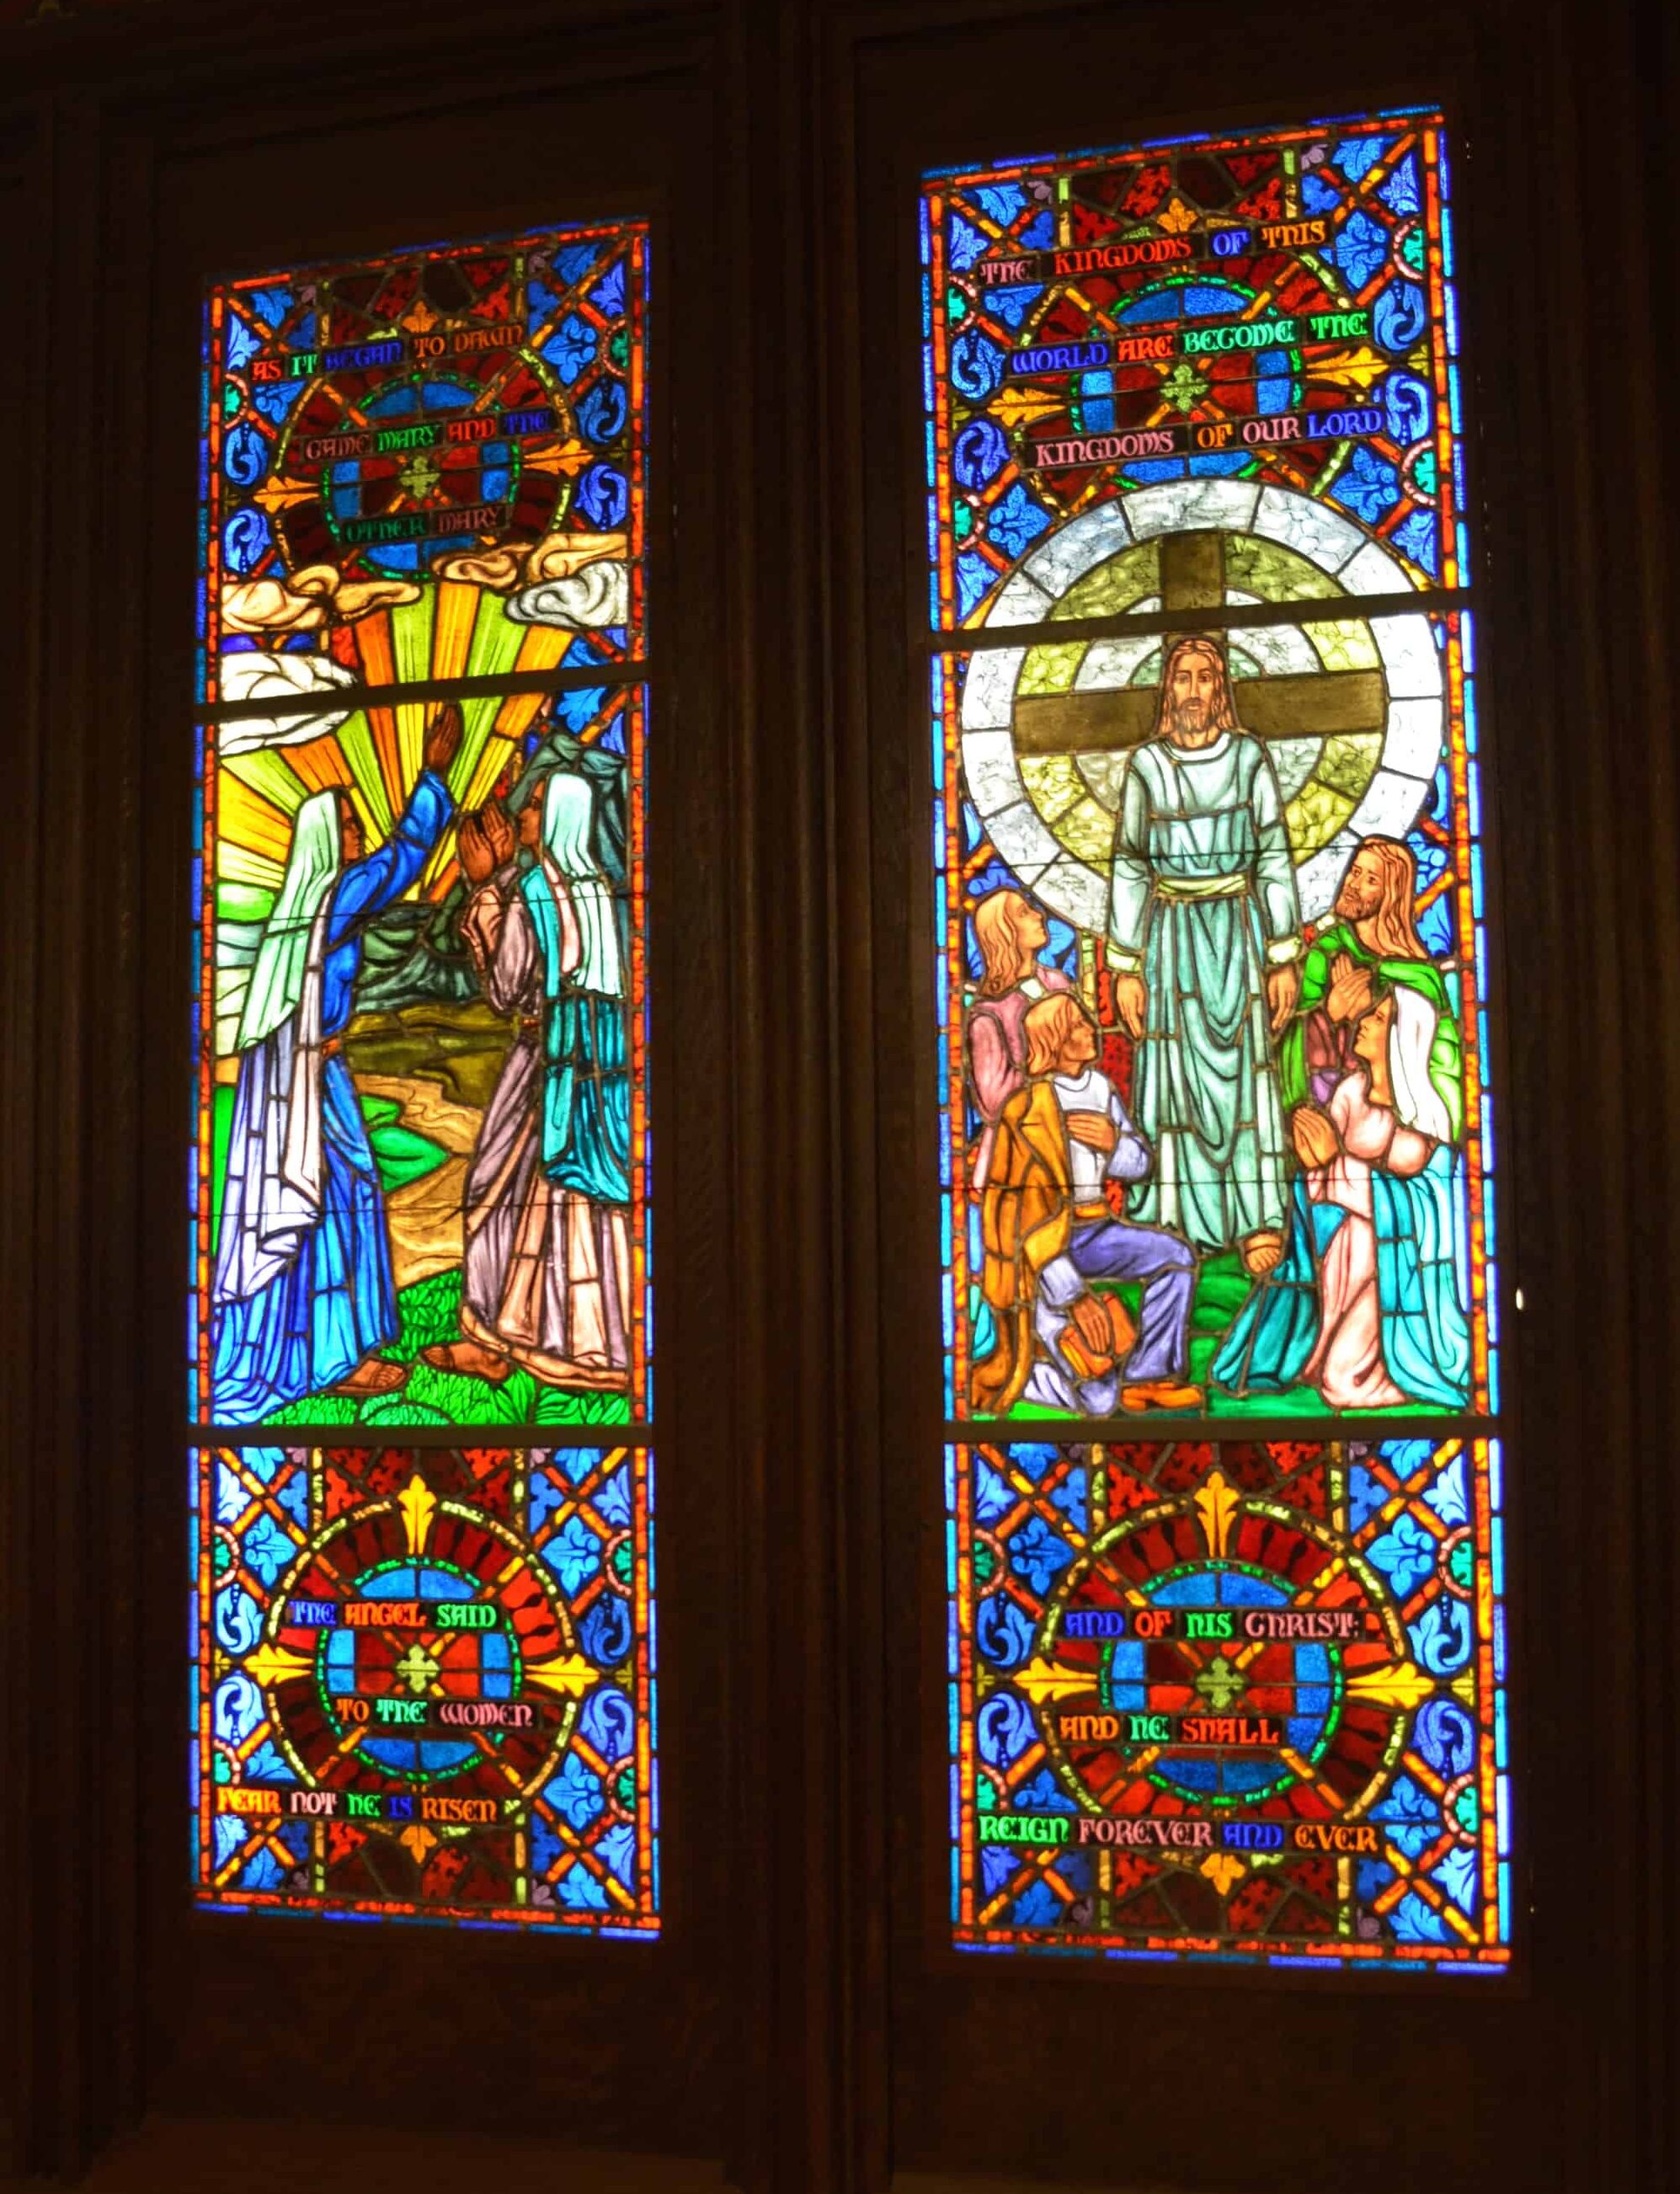 Stained glass windows at the First United Methodist Church at the Chicago Temple in Chicago, Illinois